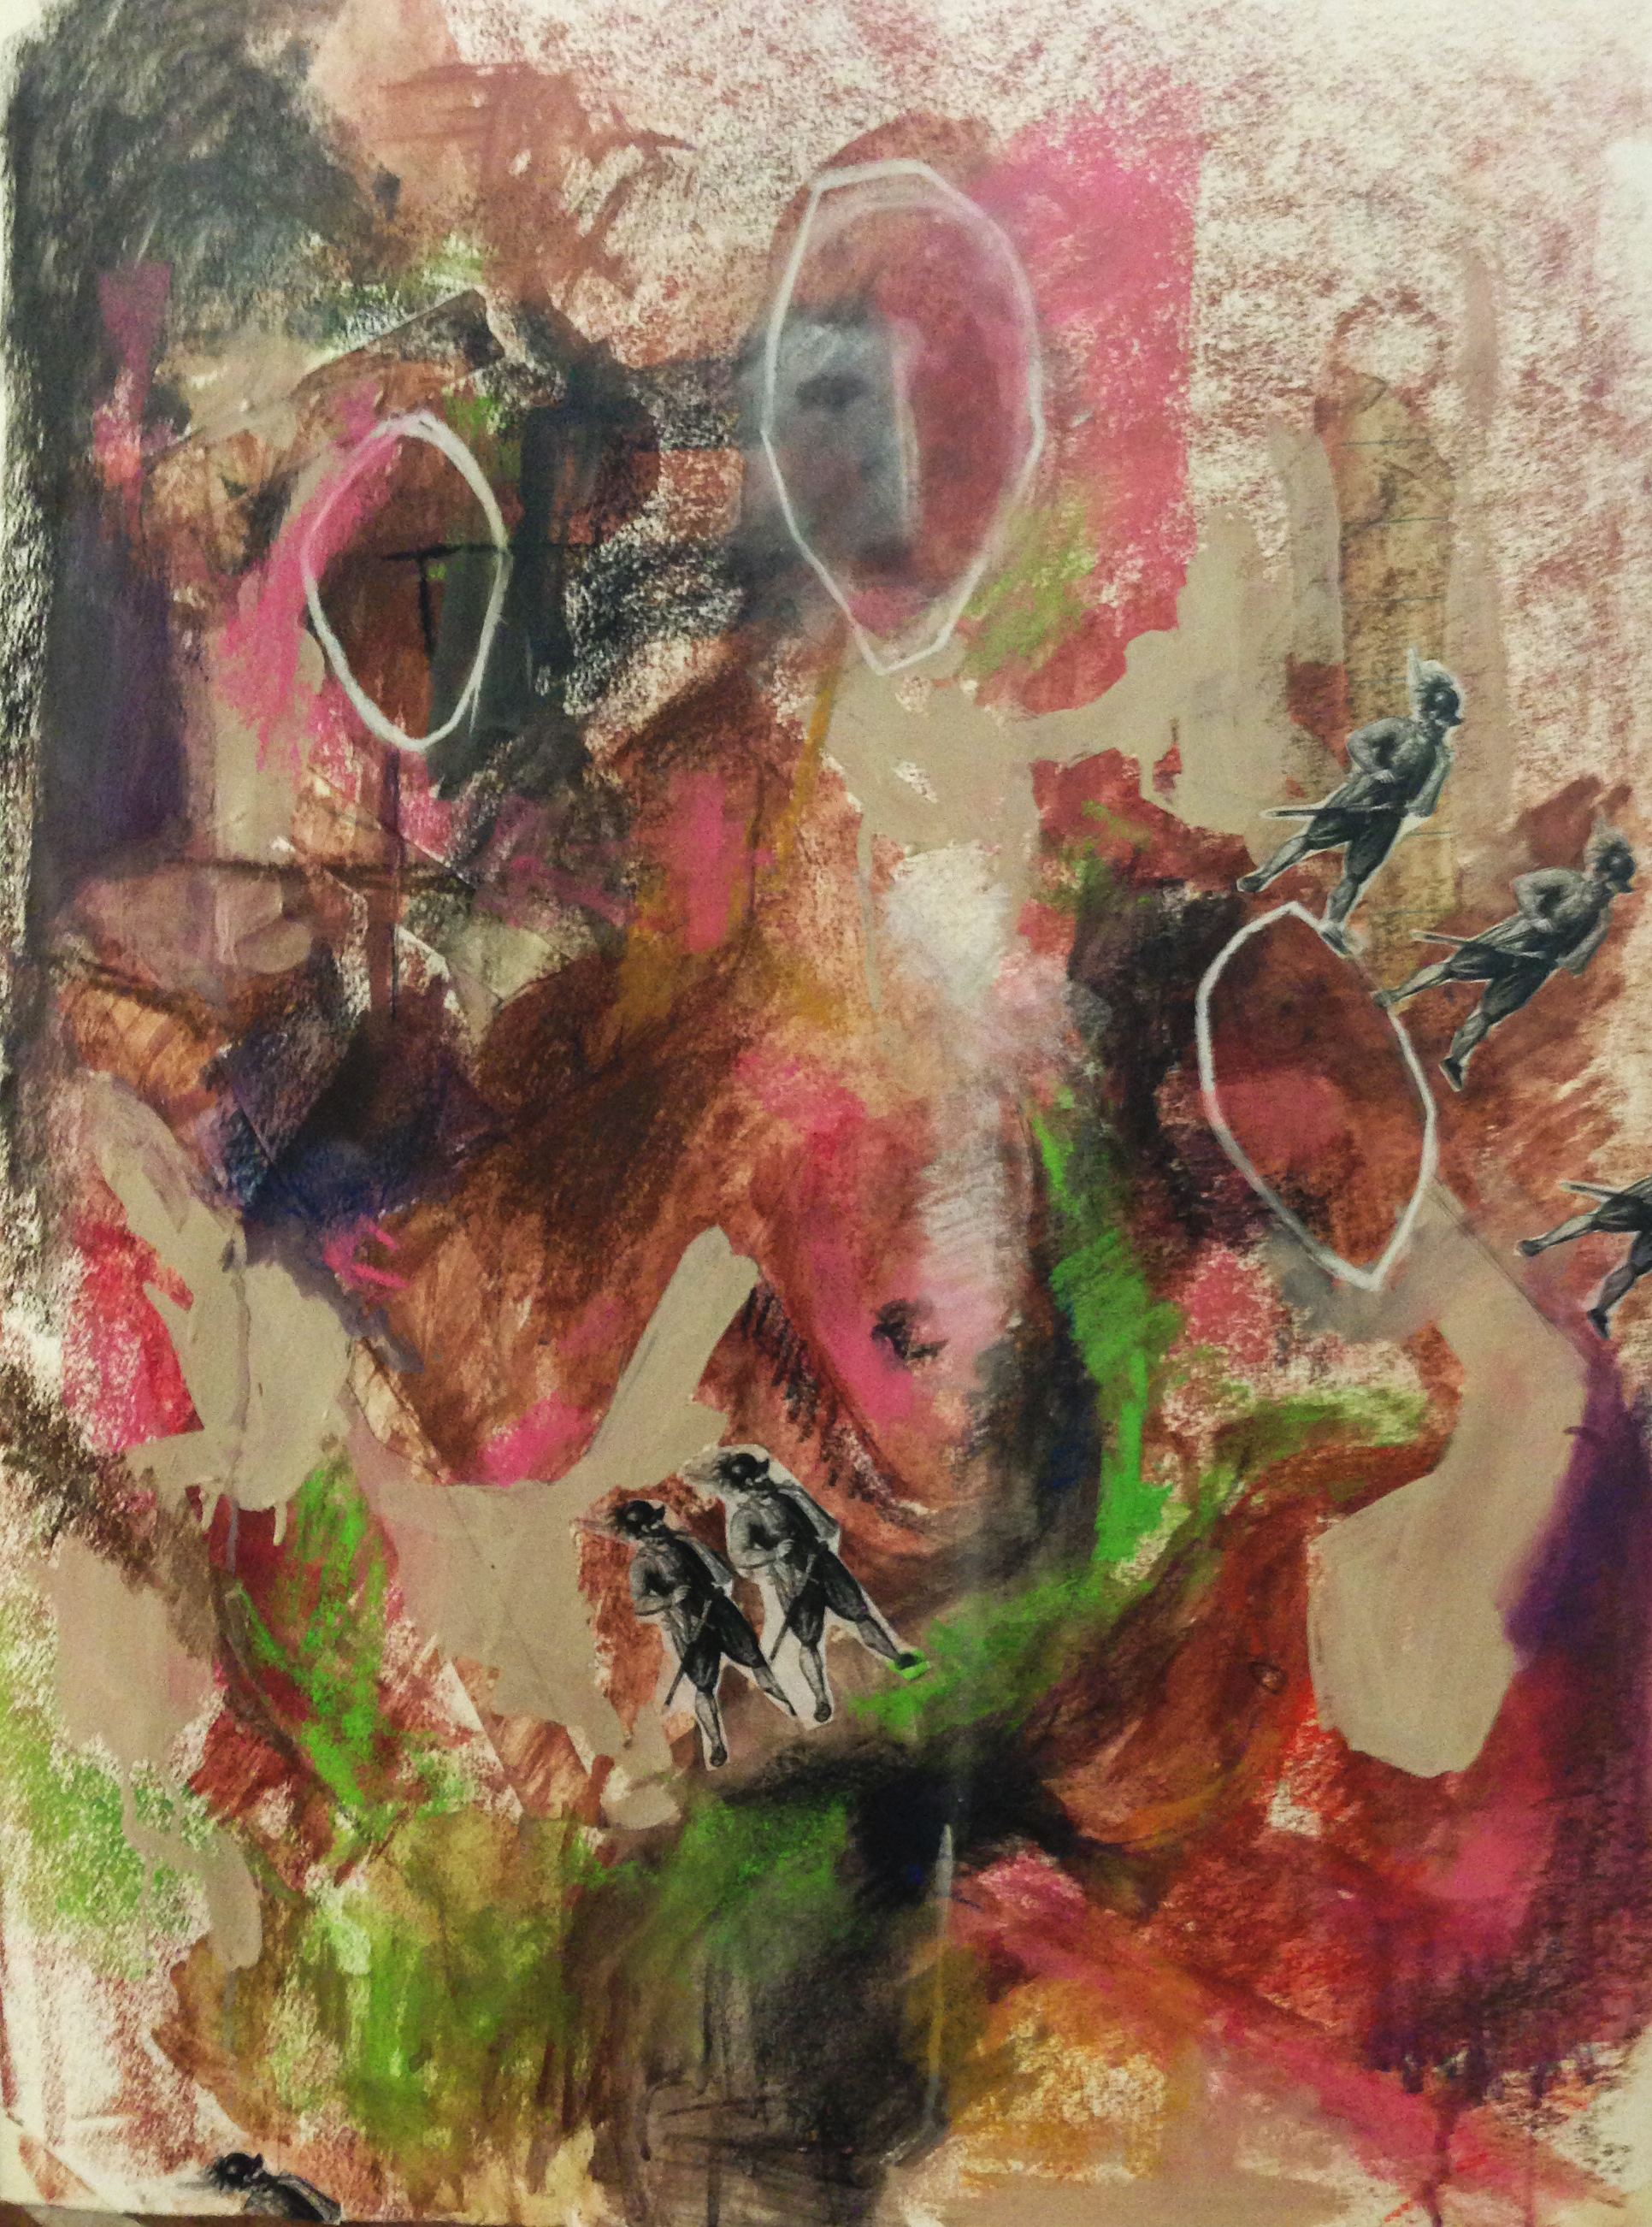  mixed-media painting on paper  18 x 24  2014 